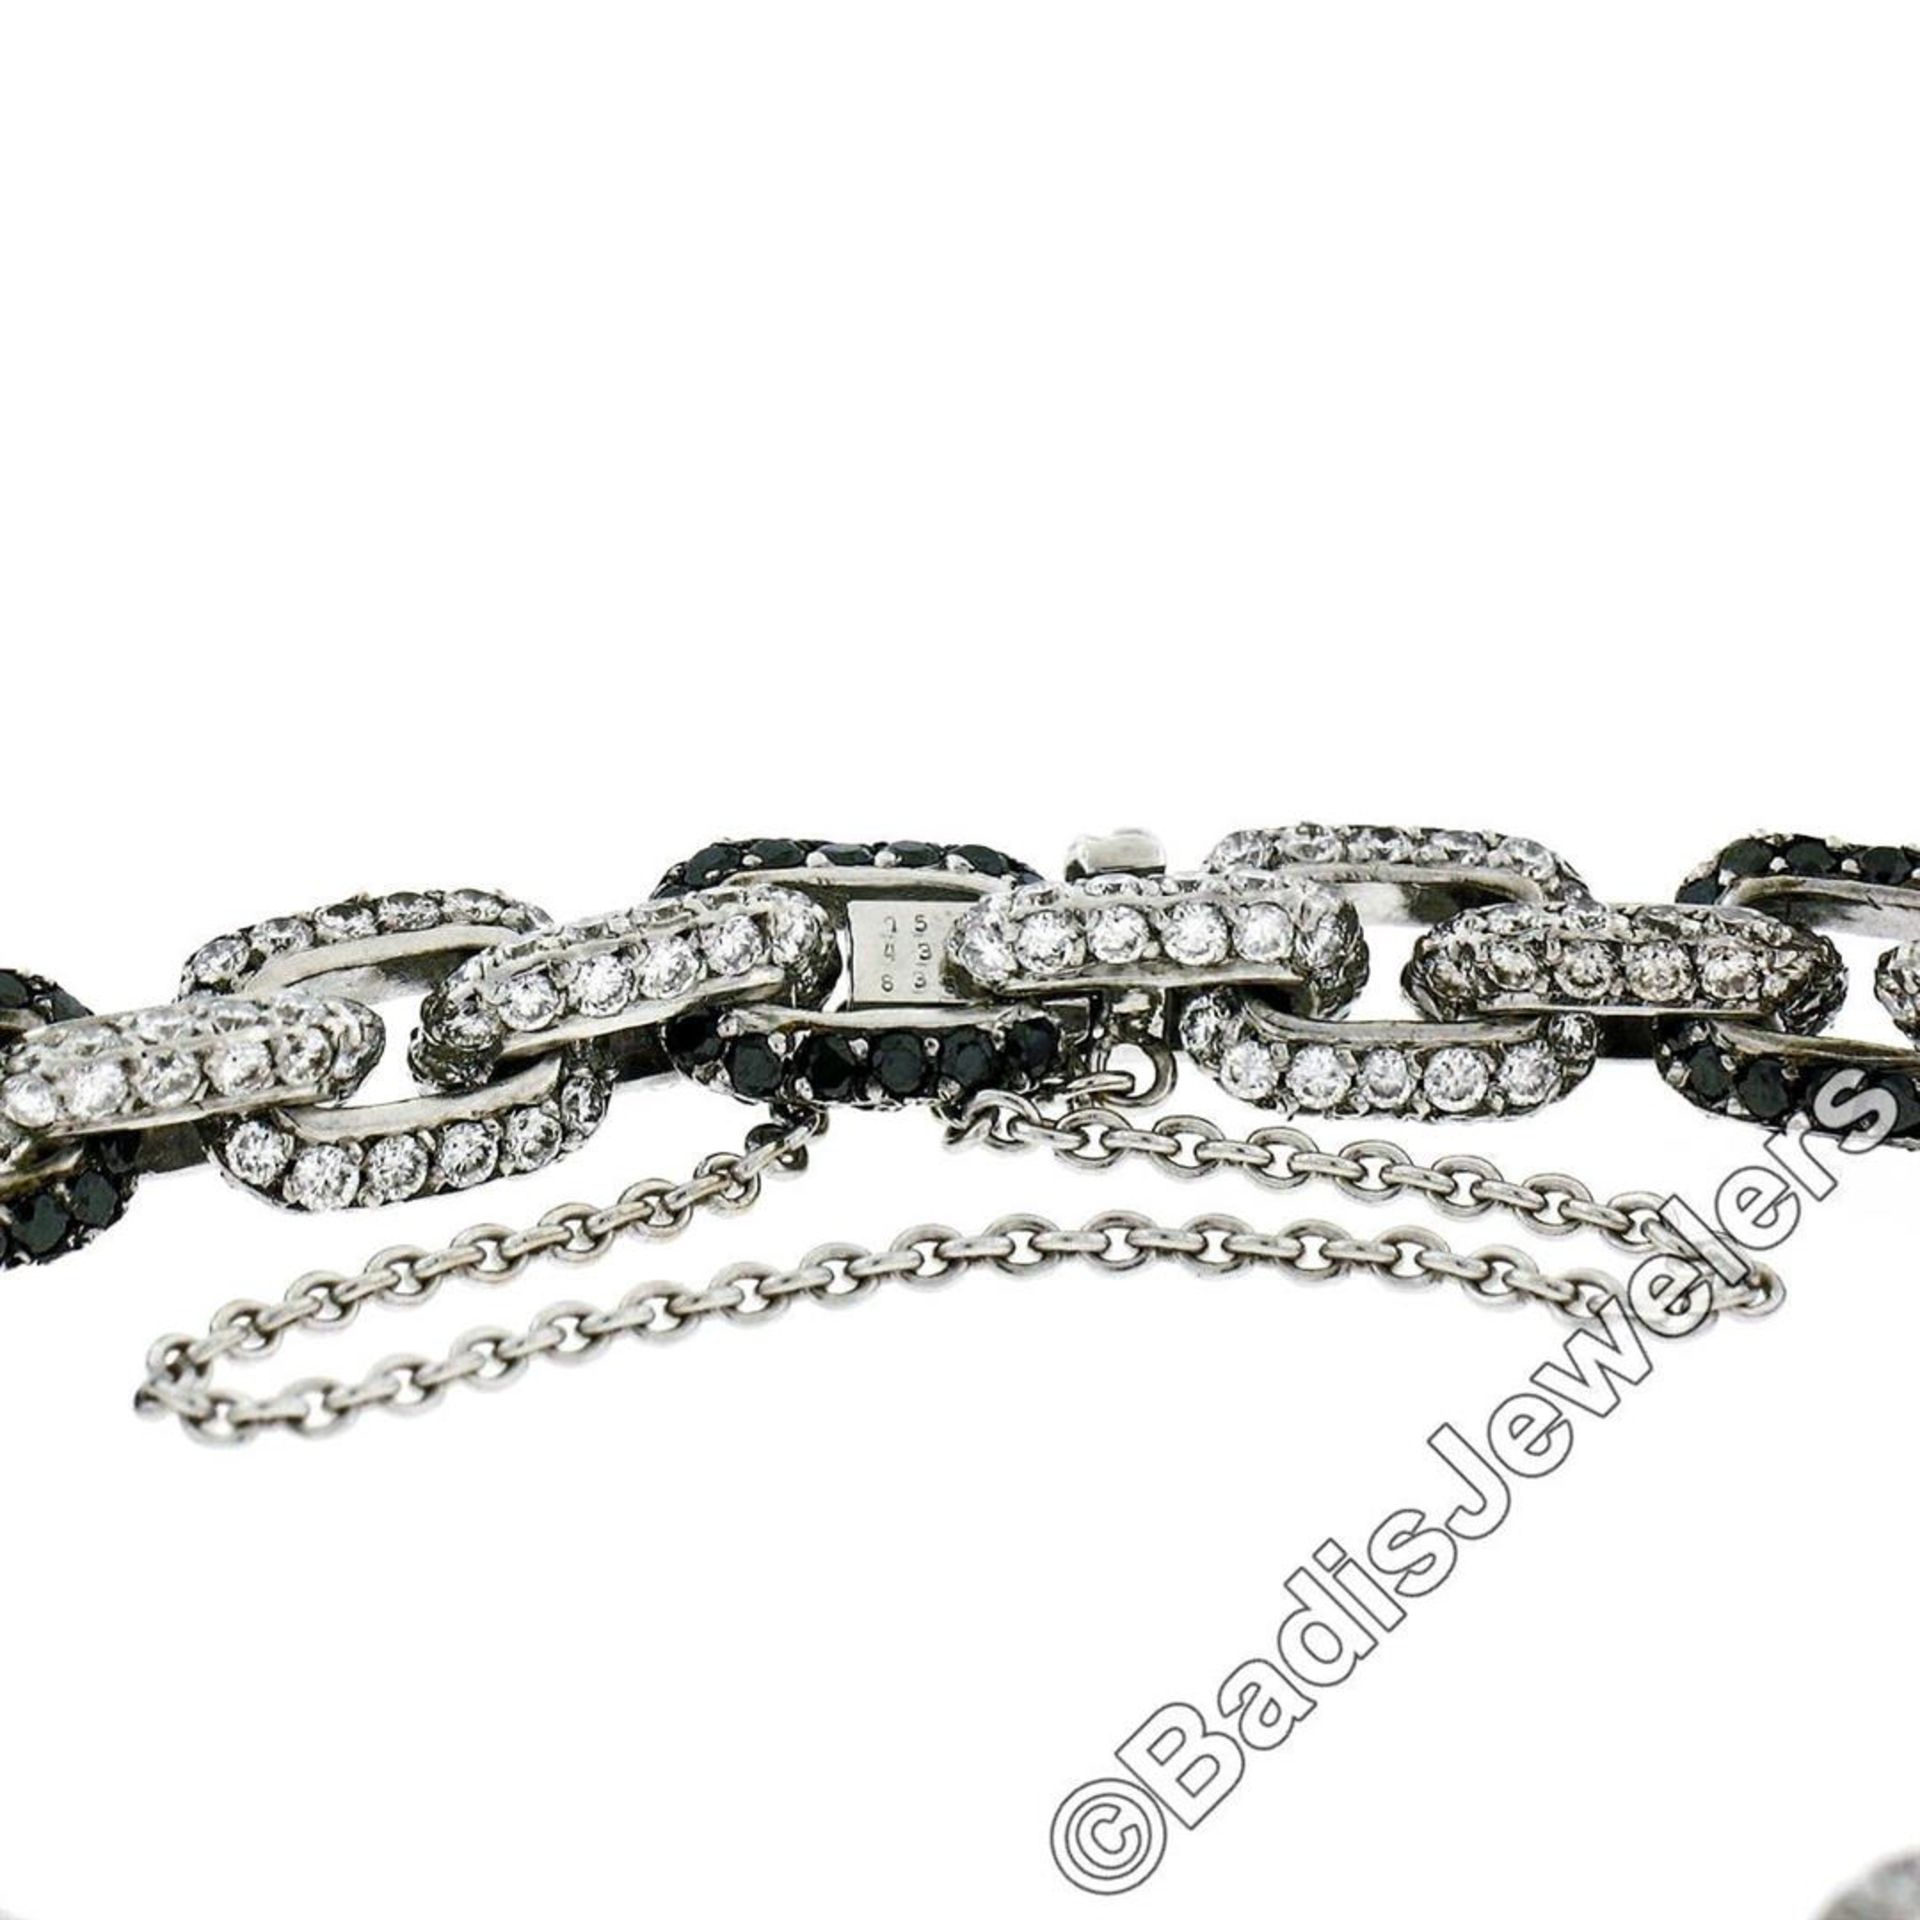 18kt White Gold 8.33ctw Round White and Black Diamond Cable Link Bracelet - Image 6 of 7